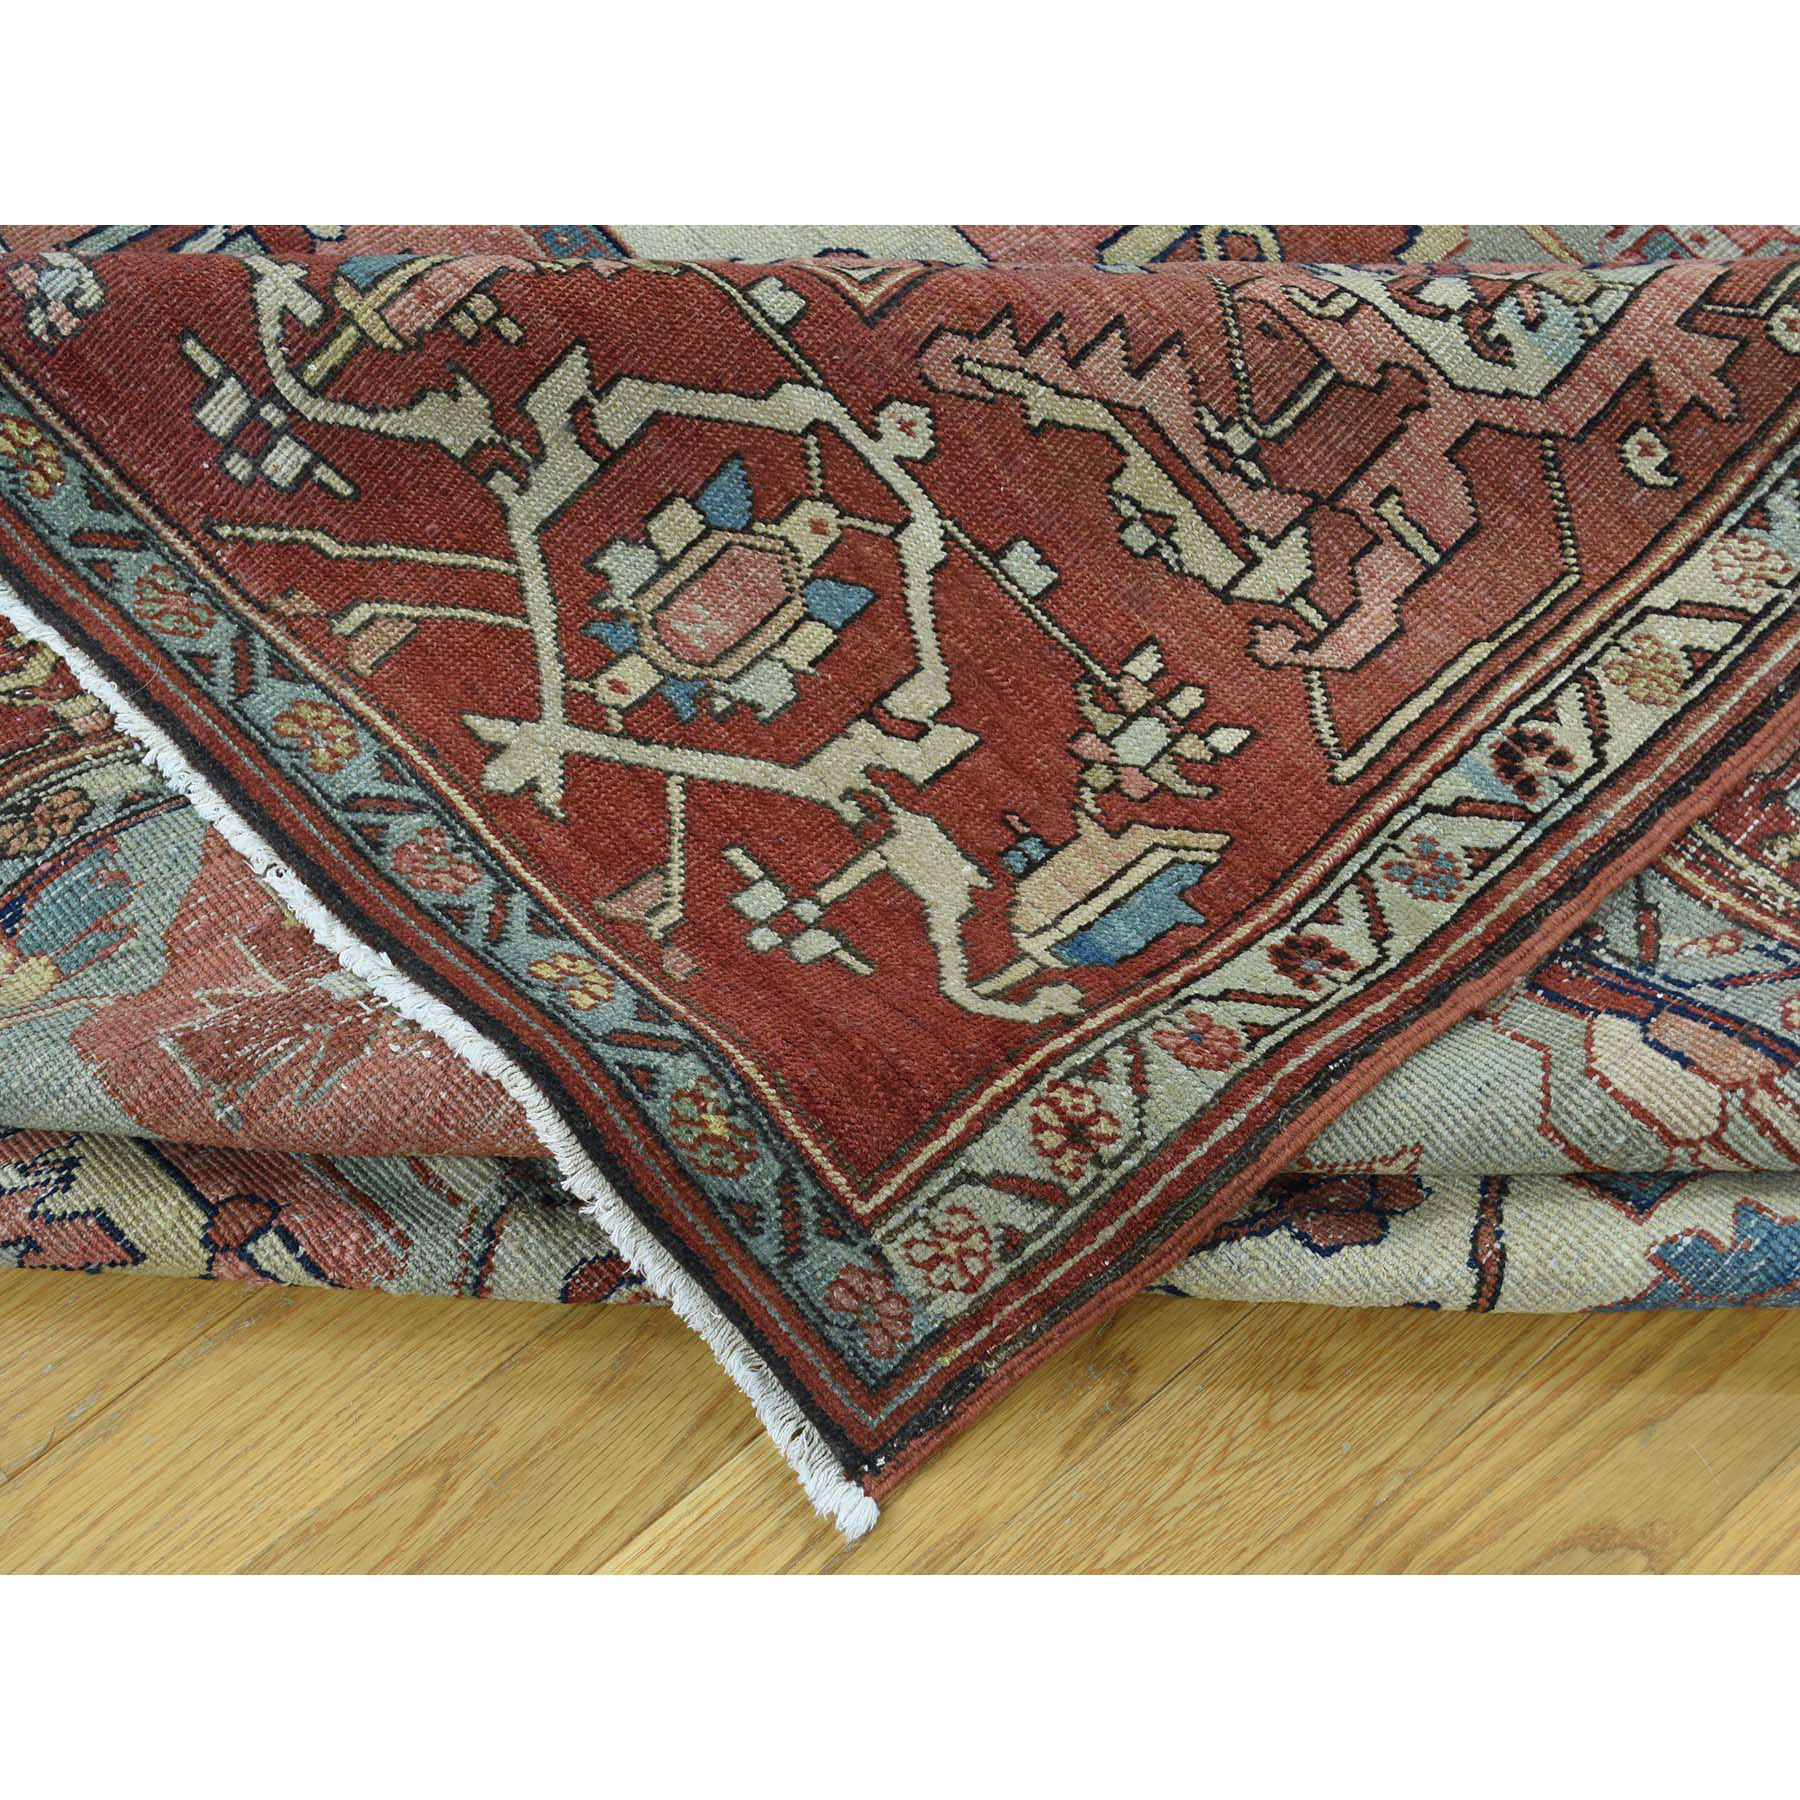 9-5 x12-8  Hand-Knotted Antique Persian Serapi Good Cond Even Wear Rug 